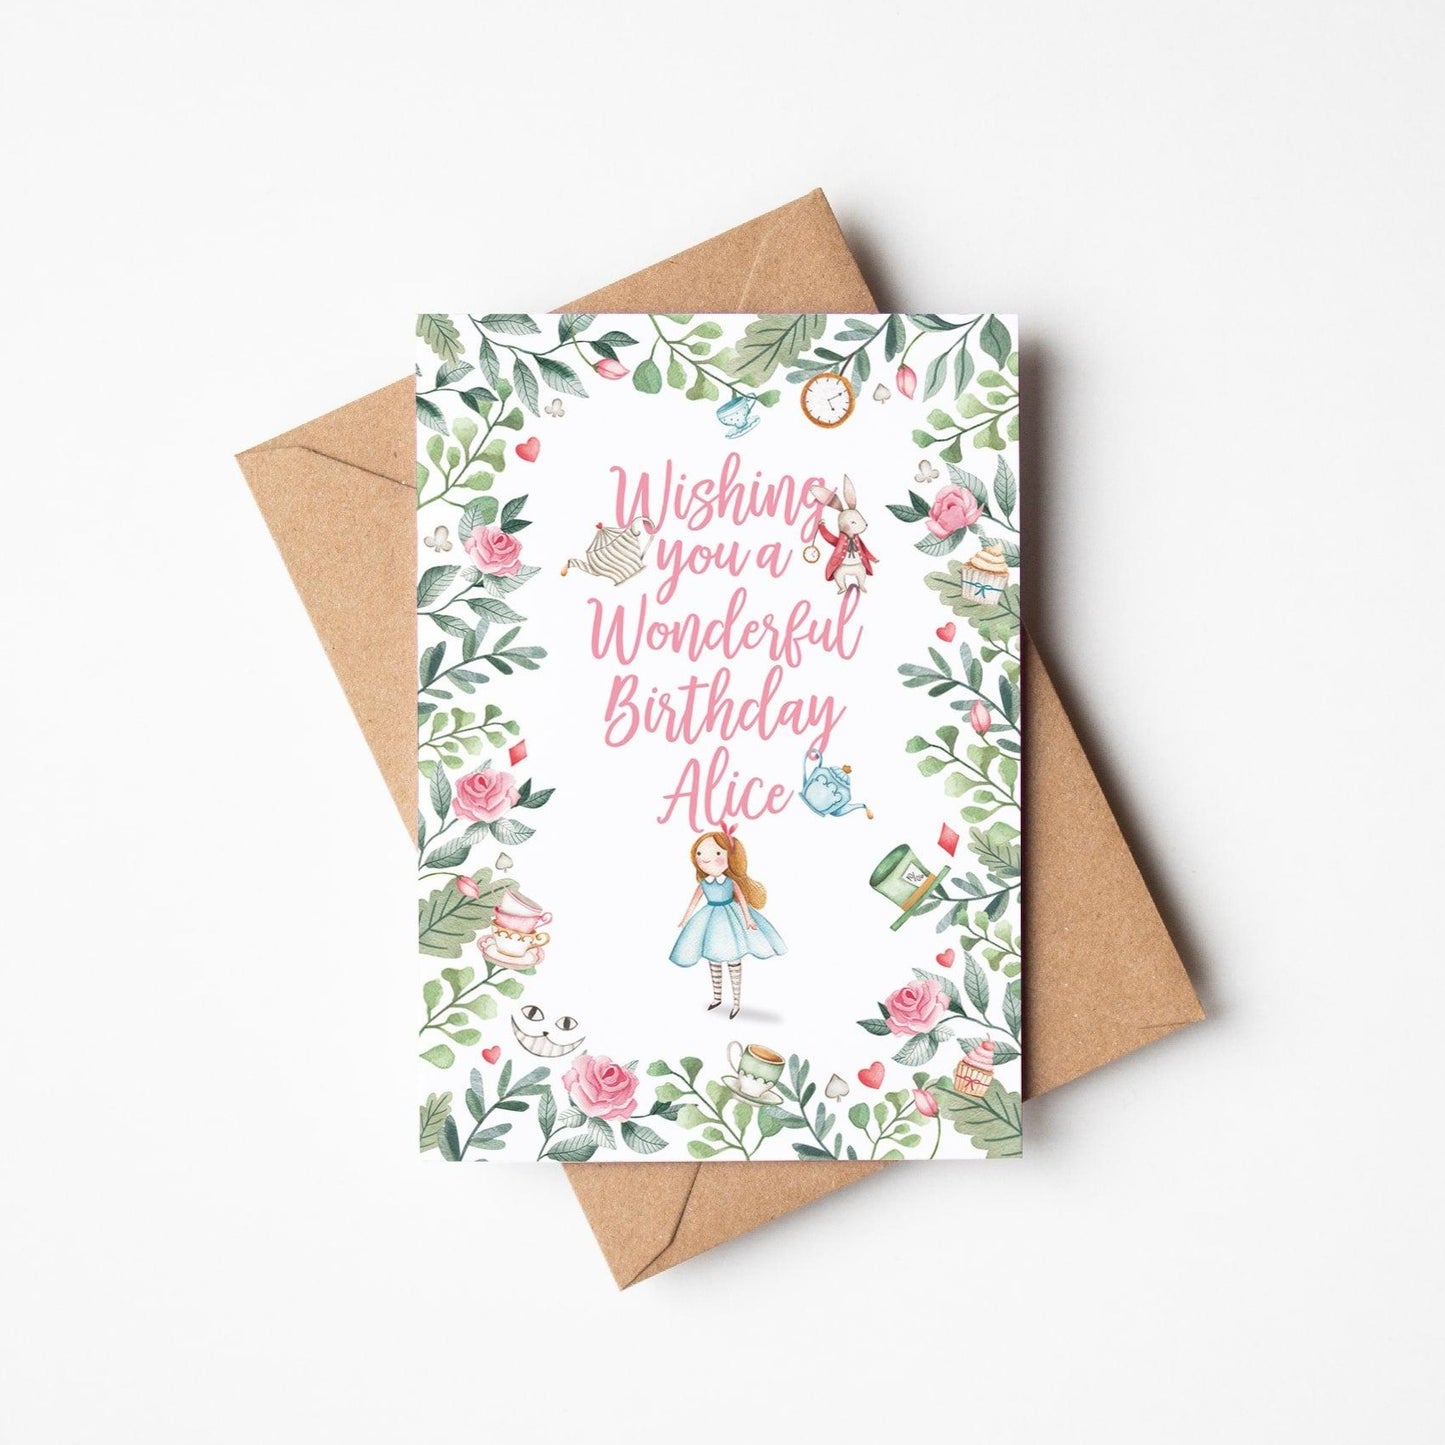 Alice in wonderland personalised birthday card with pink text and kraft envelope